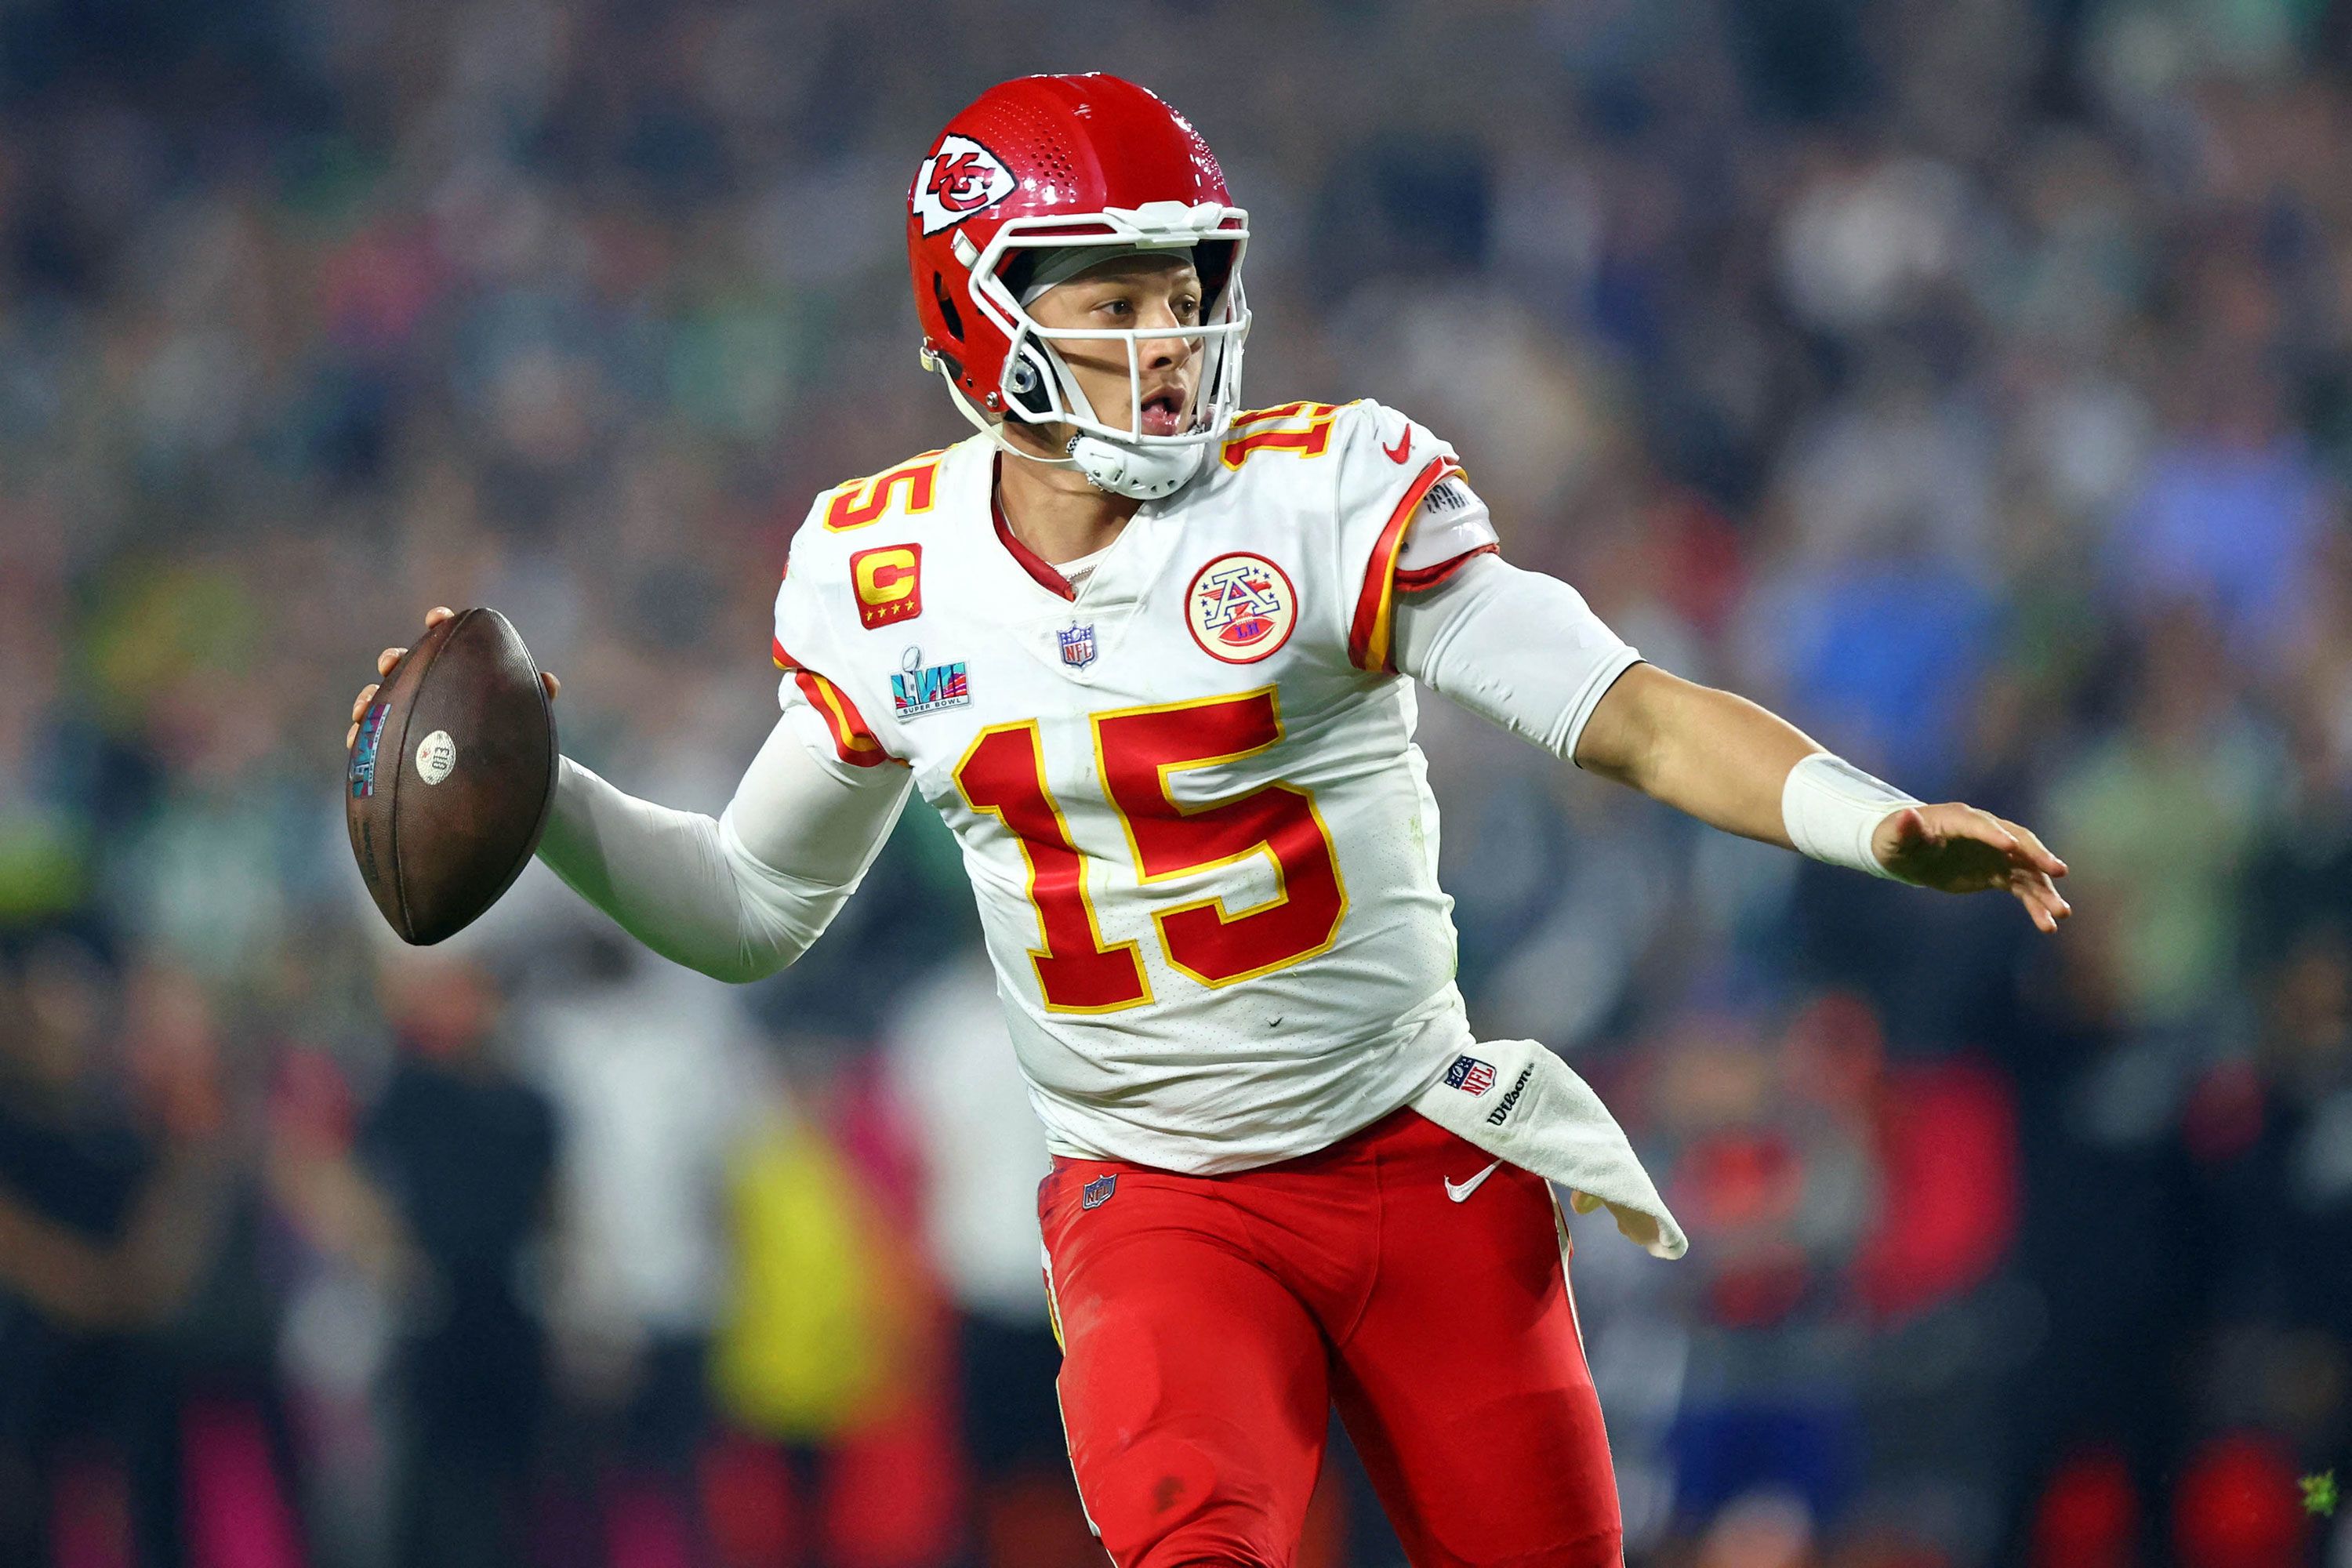 How Patrick Mahomes Became the NFL's Most Exciting Player